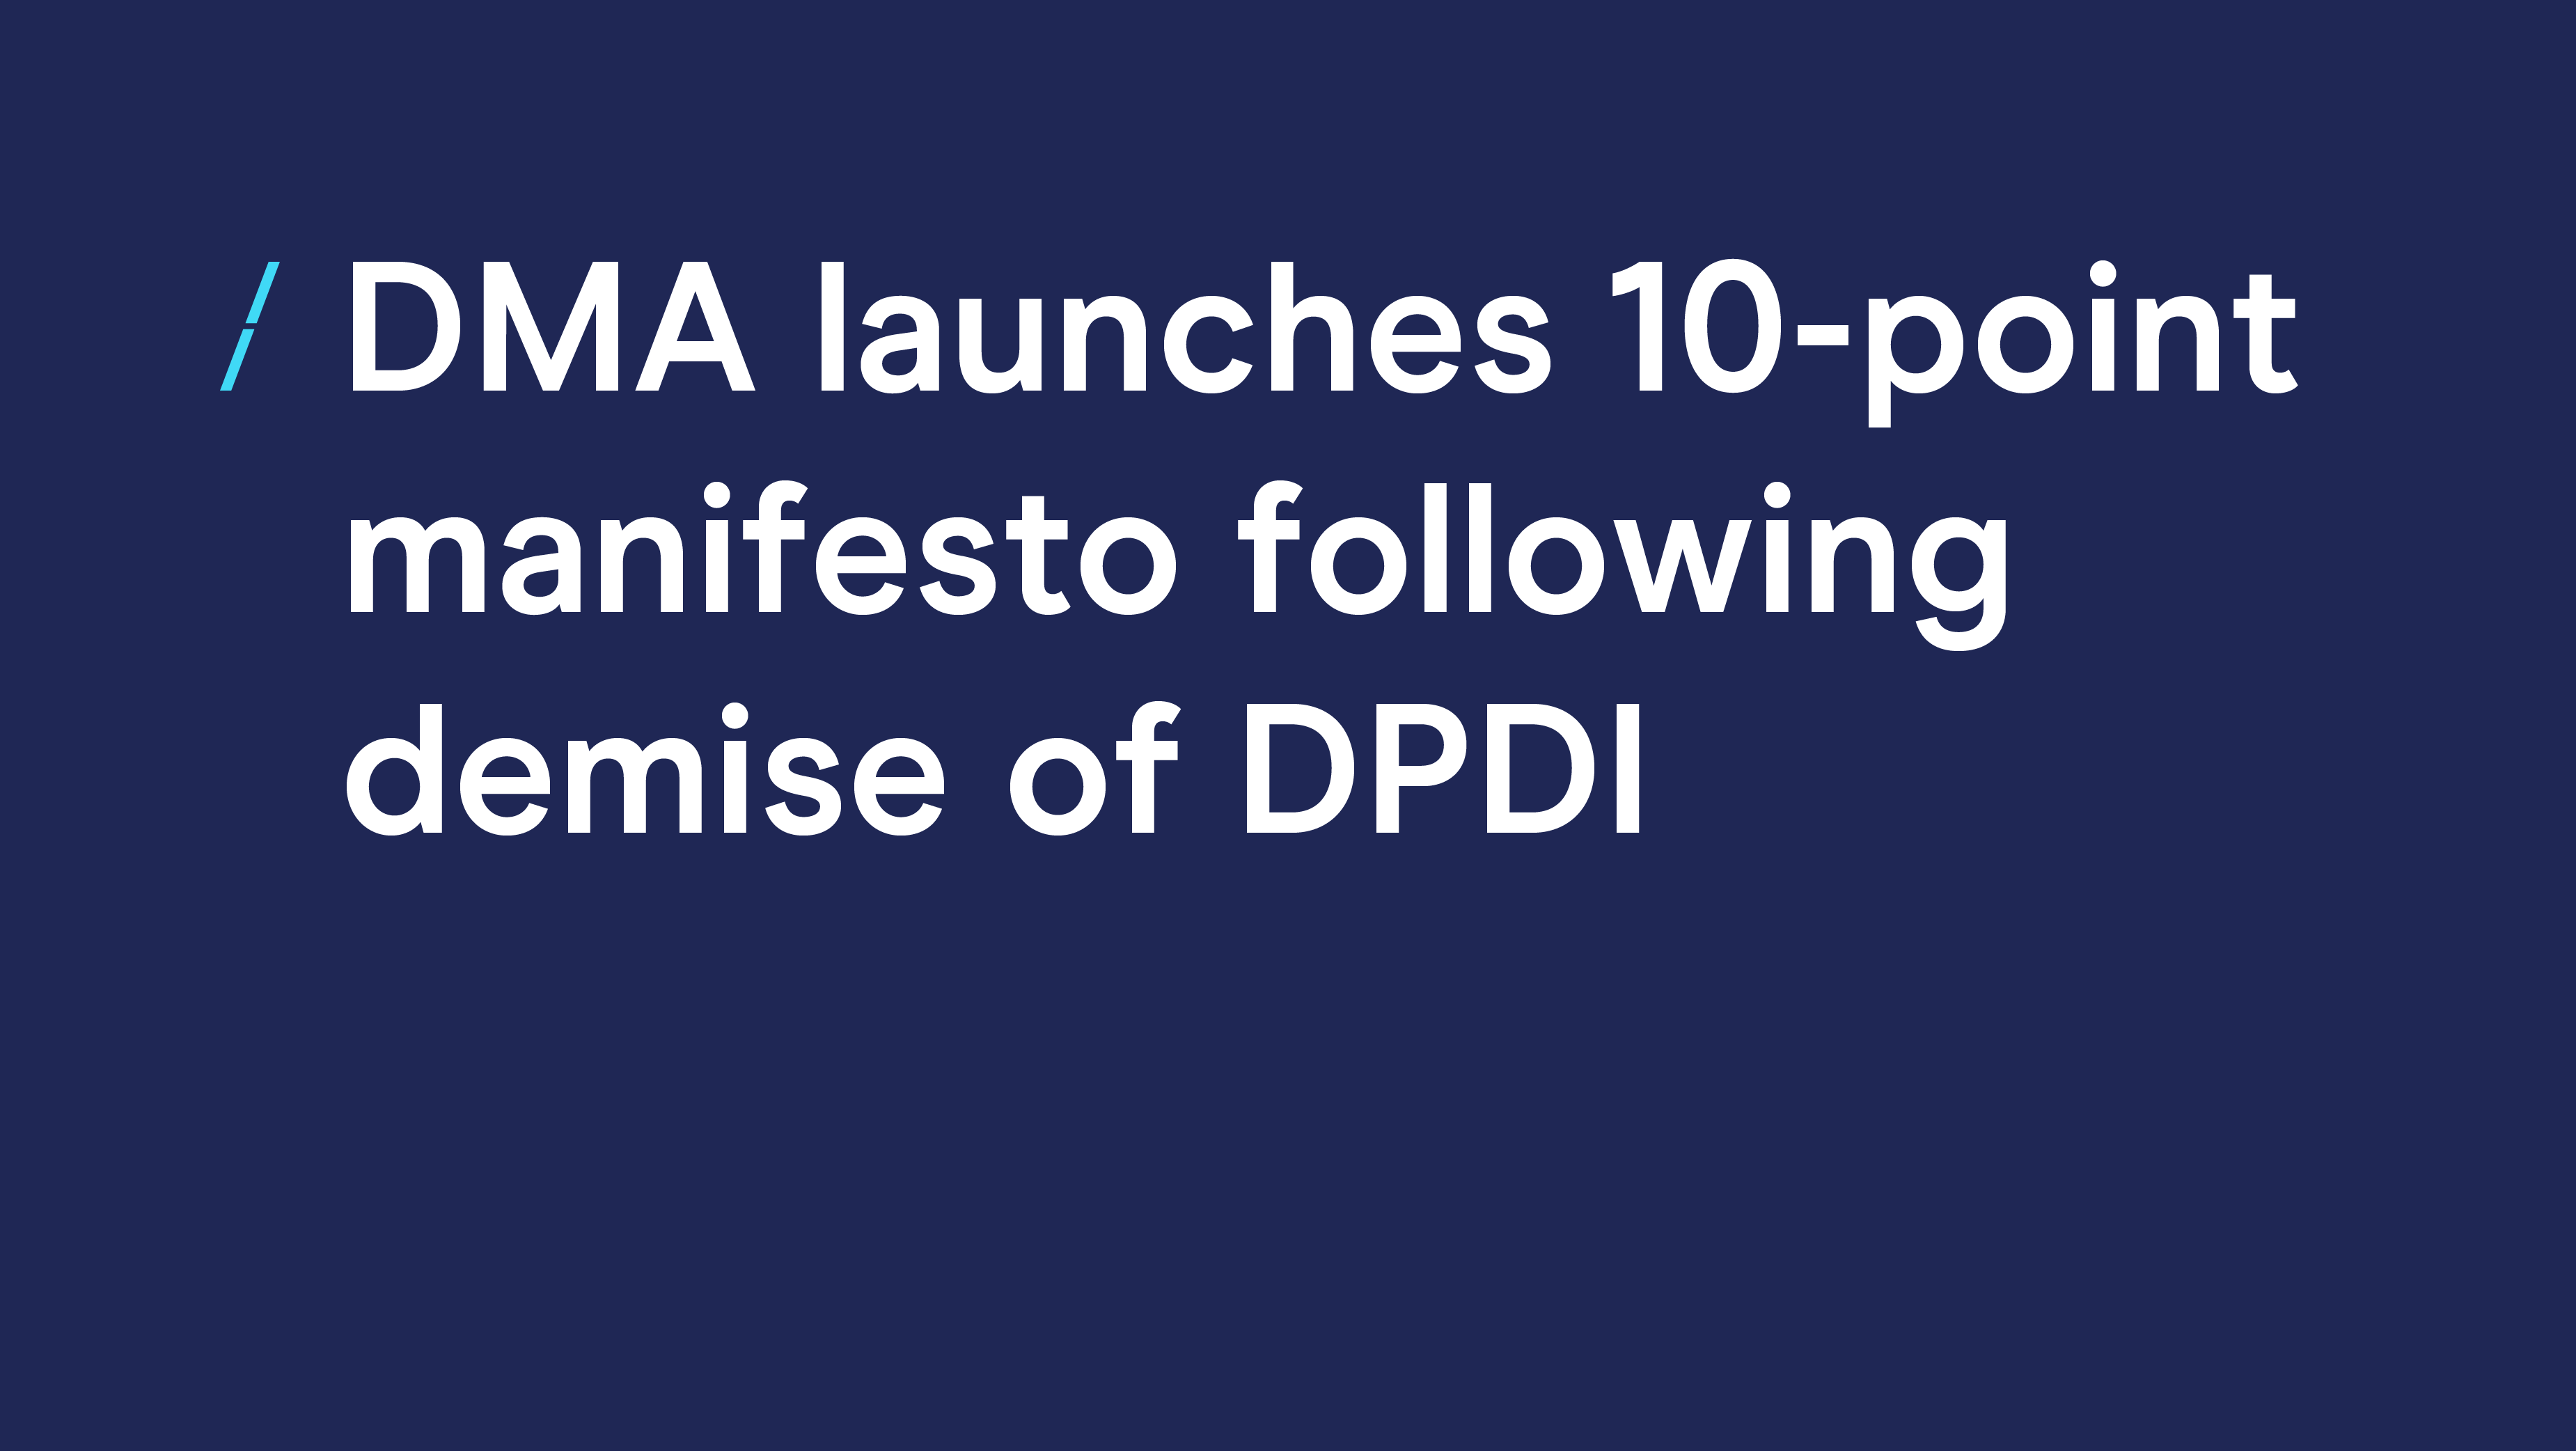 DMA launches 10-point manifesto following demise of DPDI 1.png